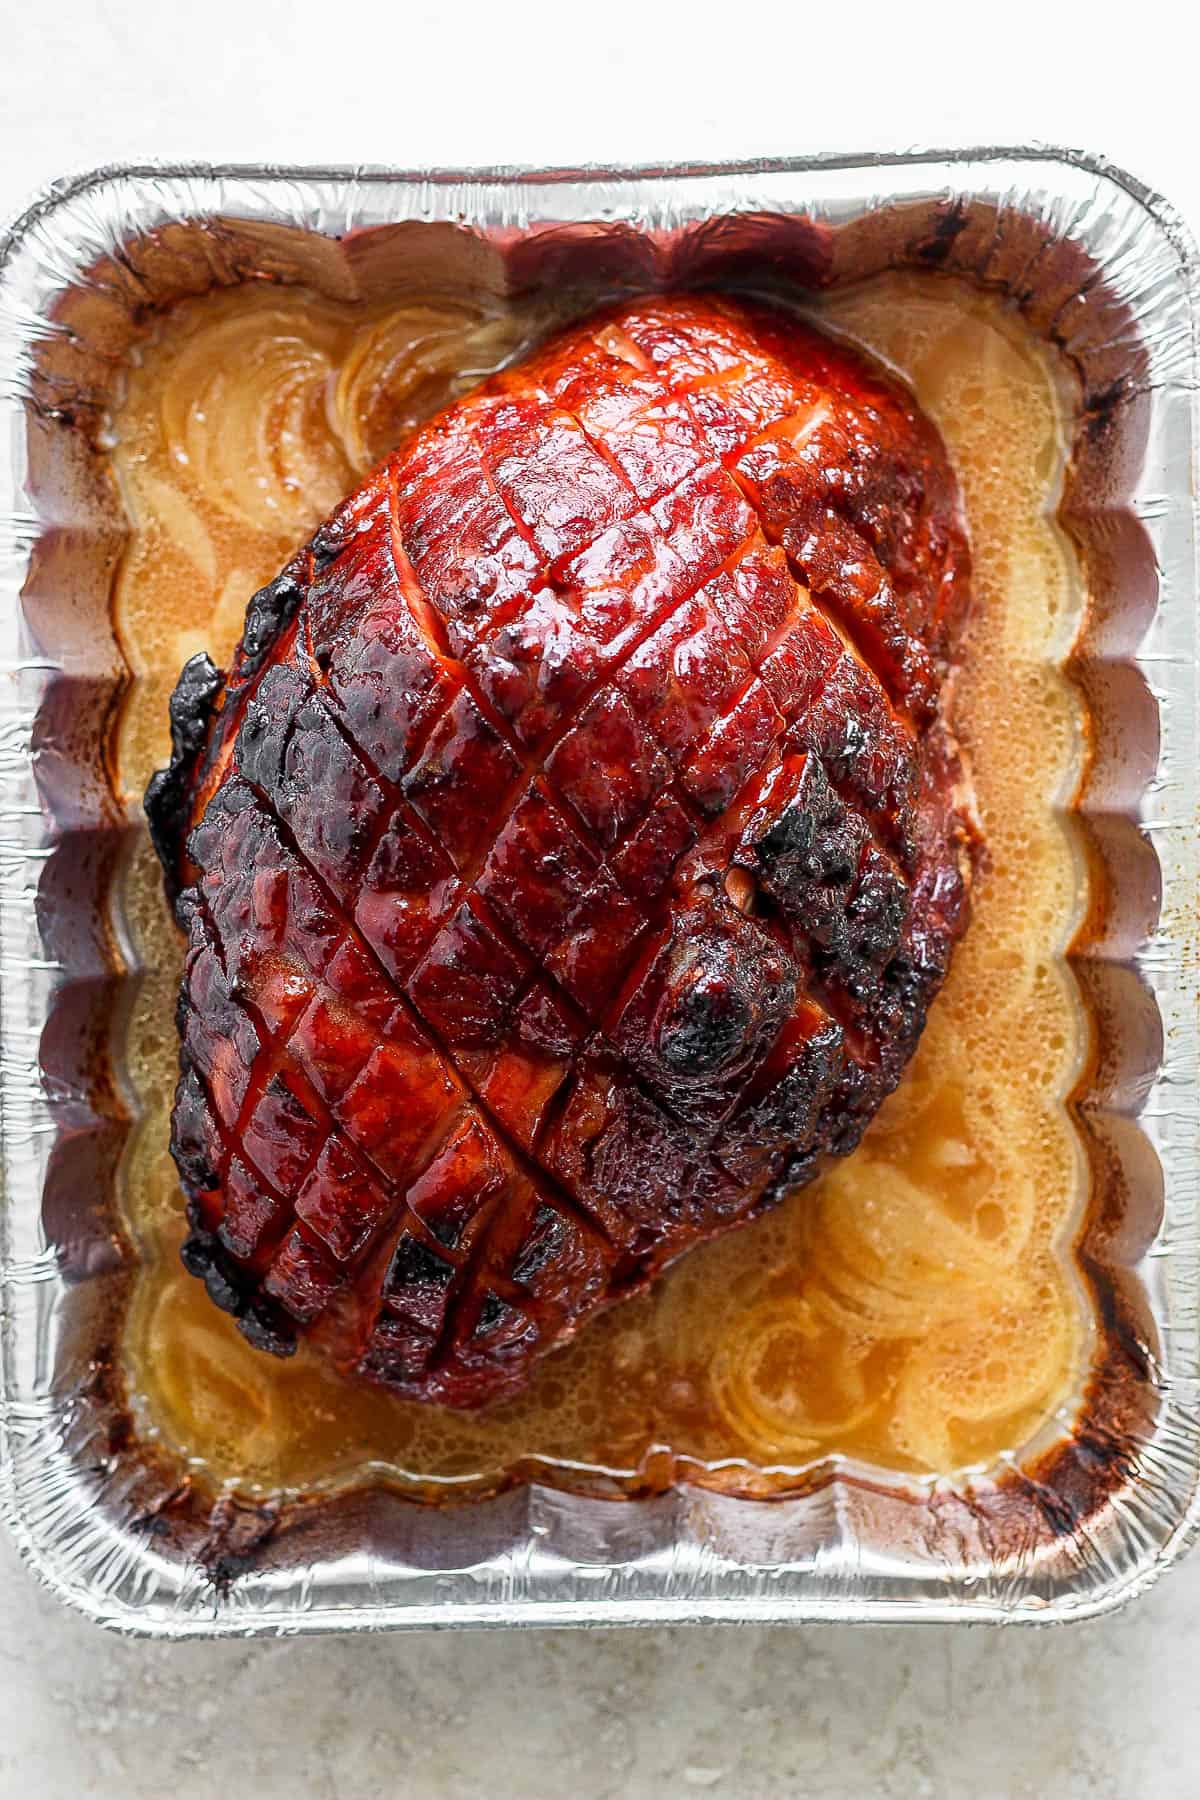 A fully cooked ham in an aluminum roasting pan.